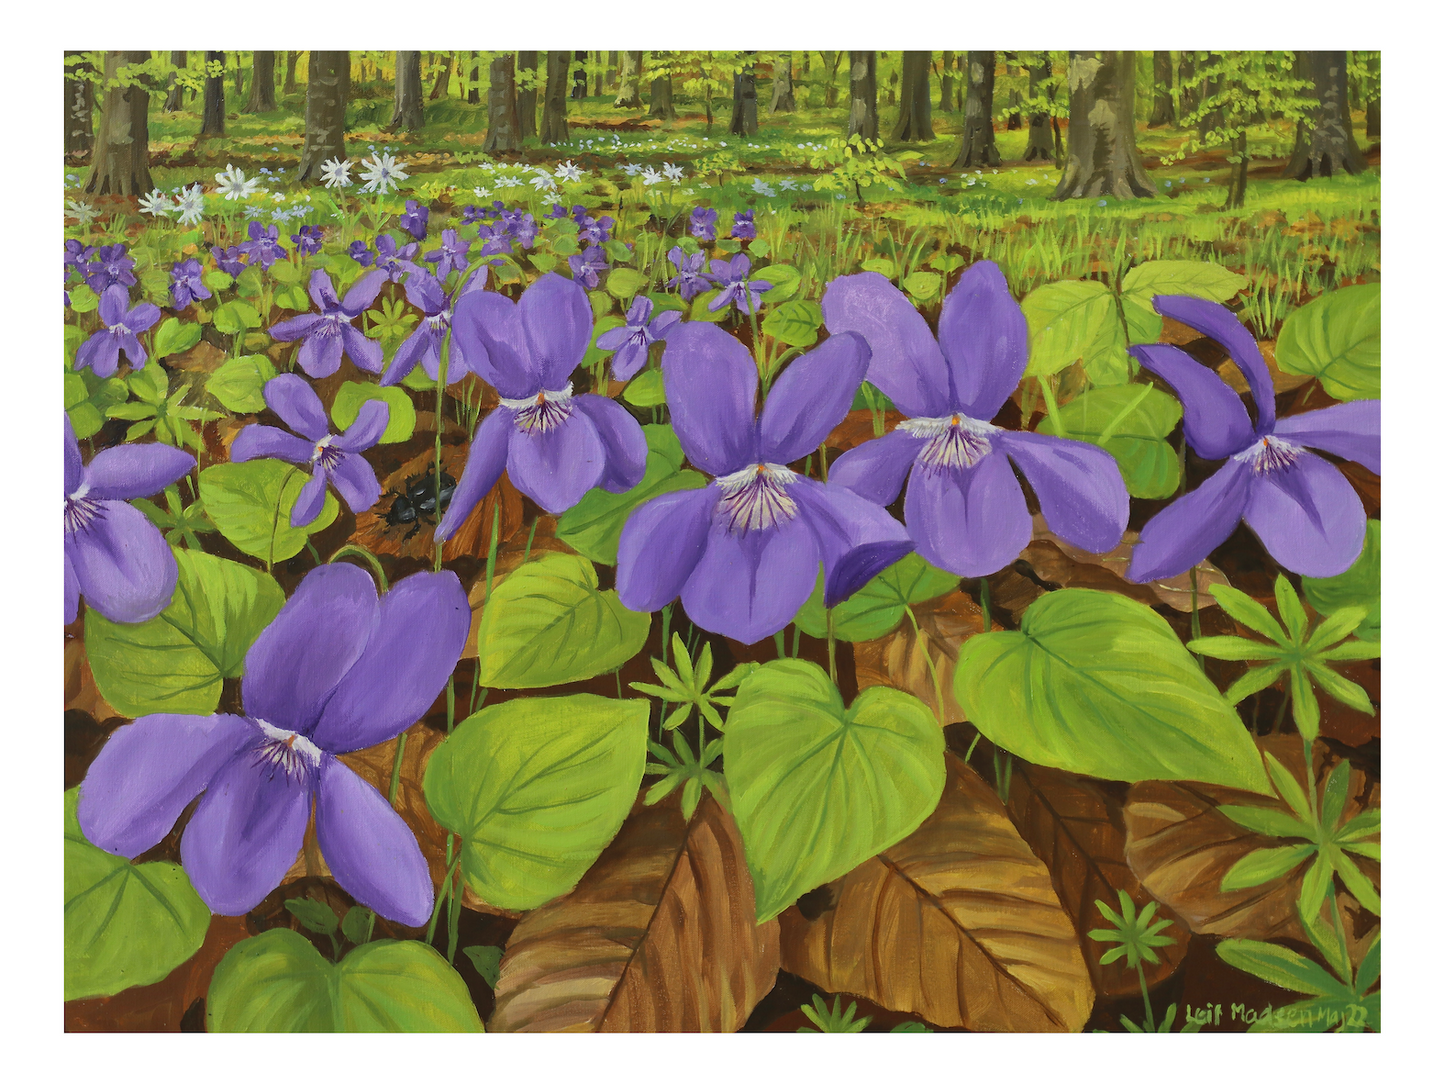 Violets in the forest floor